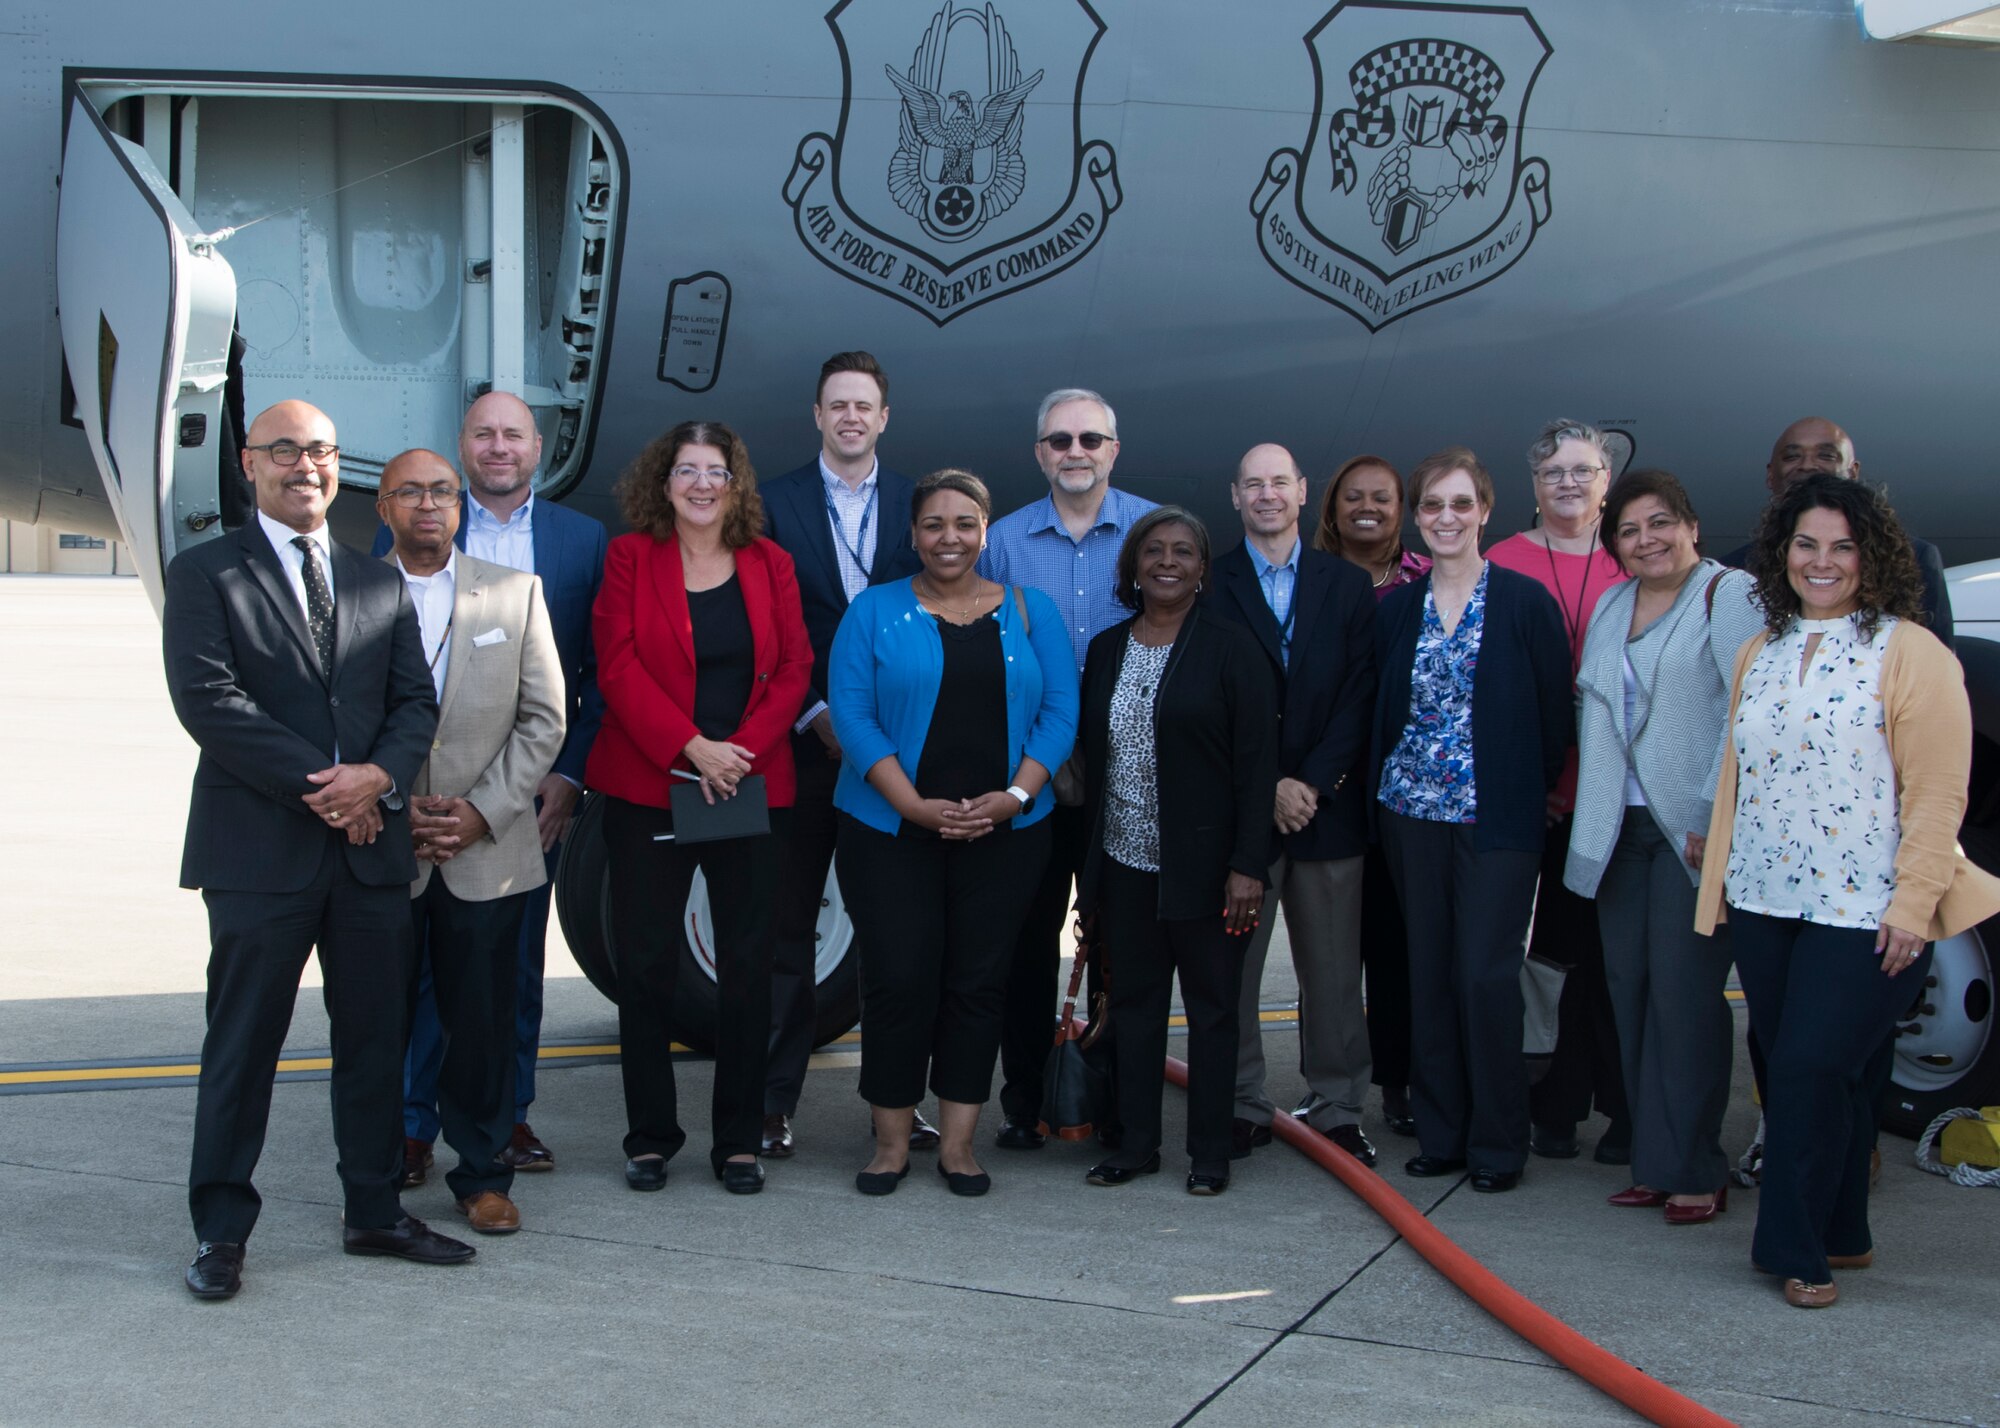 Members of Headquarters Air Force pose for a photo after touring a KC-135 Stratotanker Oct, 7, 2019 at Joint Base Andrews, Md. The team was briefed on the KC-135 and given a tour of the aircraft. (U.S. Air Force photo by Staff Sgt. Cierra Presentado/Released)